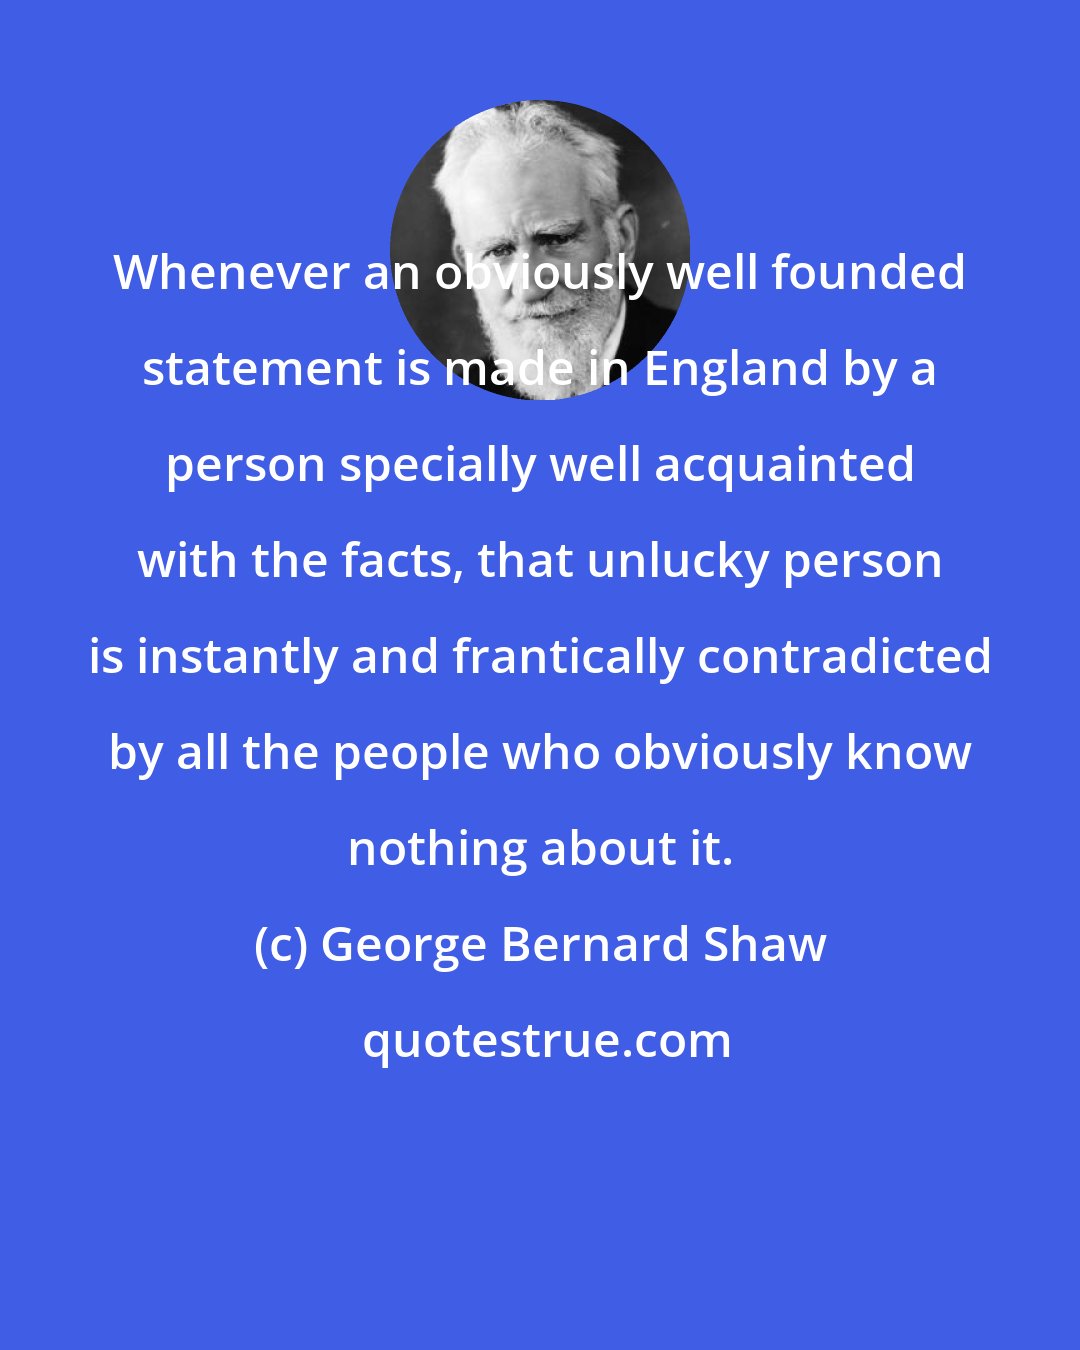 George Bernard Shaw: Whenever an obviously well founded statement is made in England by a person specially well acquainted with the facts, that unlucky person is instantly and frantically contradicted by all the people who obviously know nothing about it.